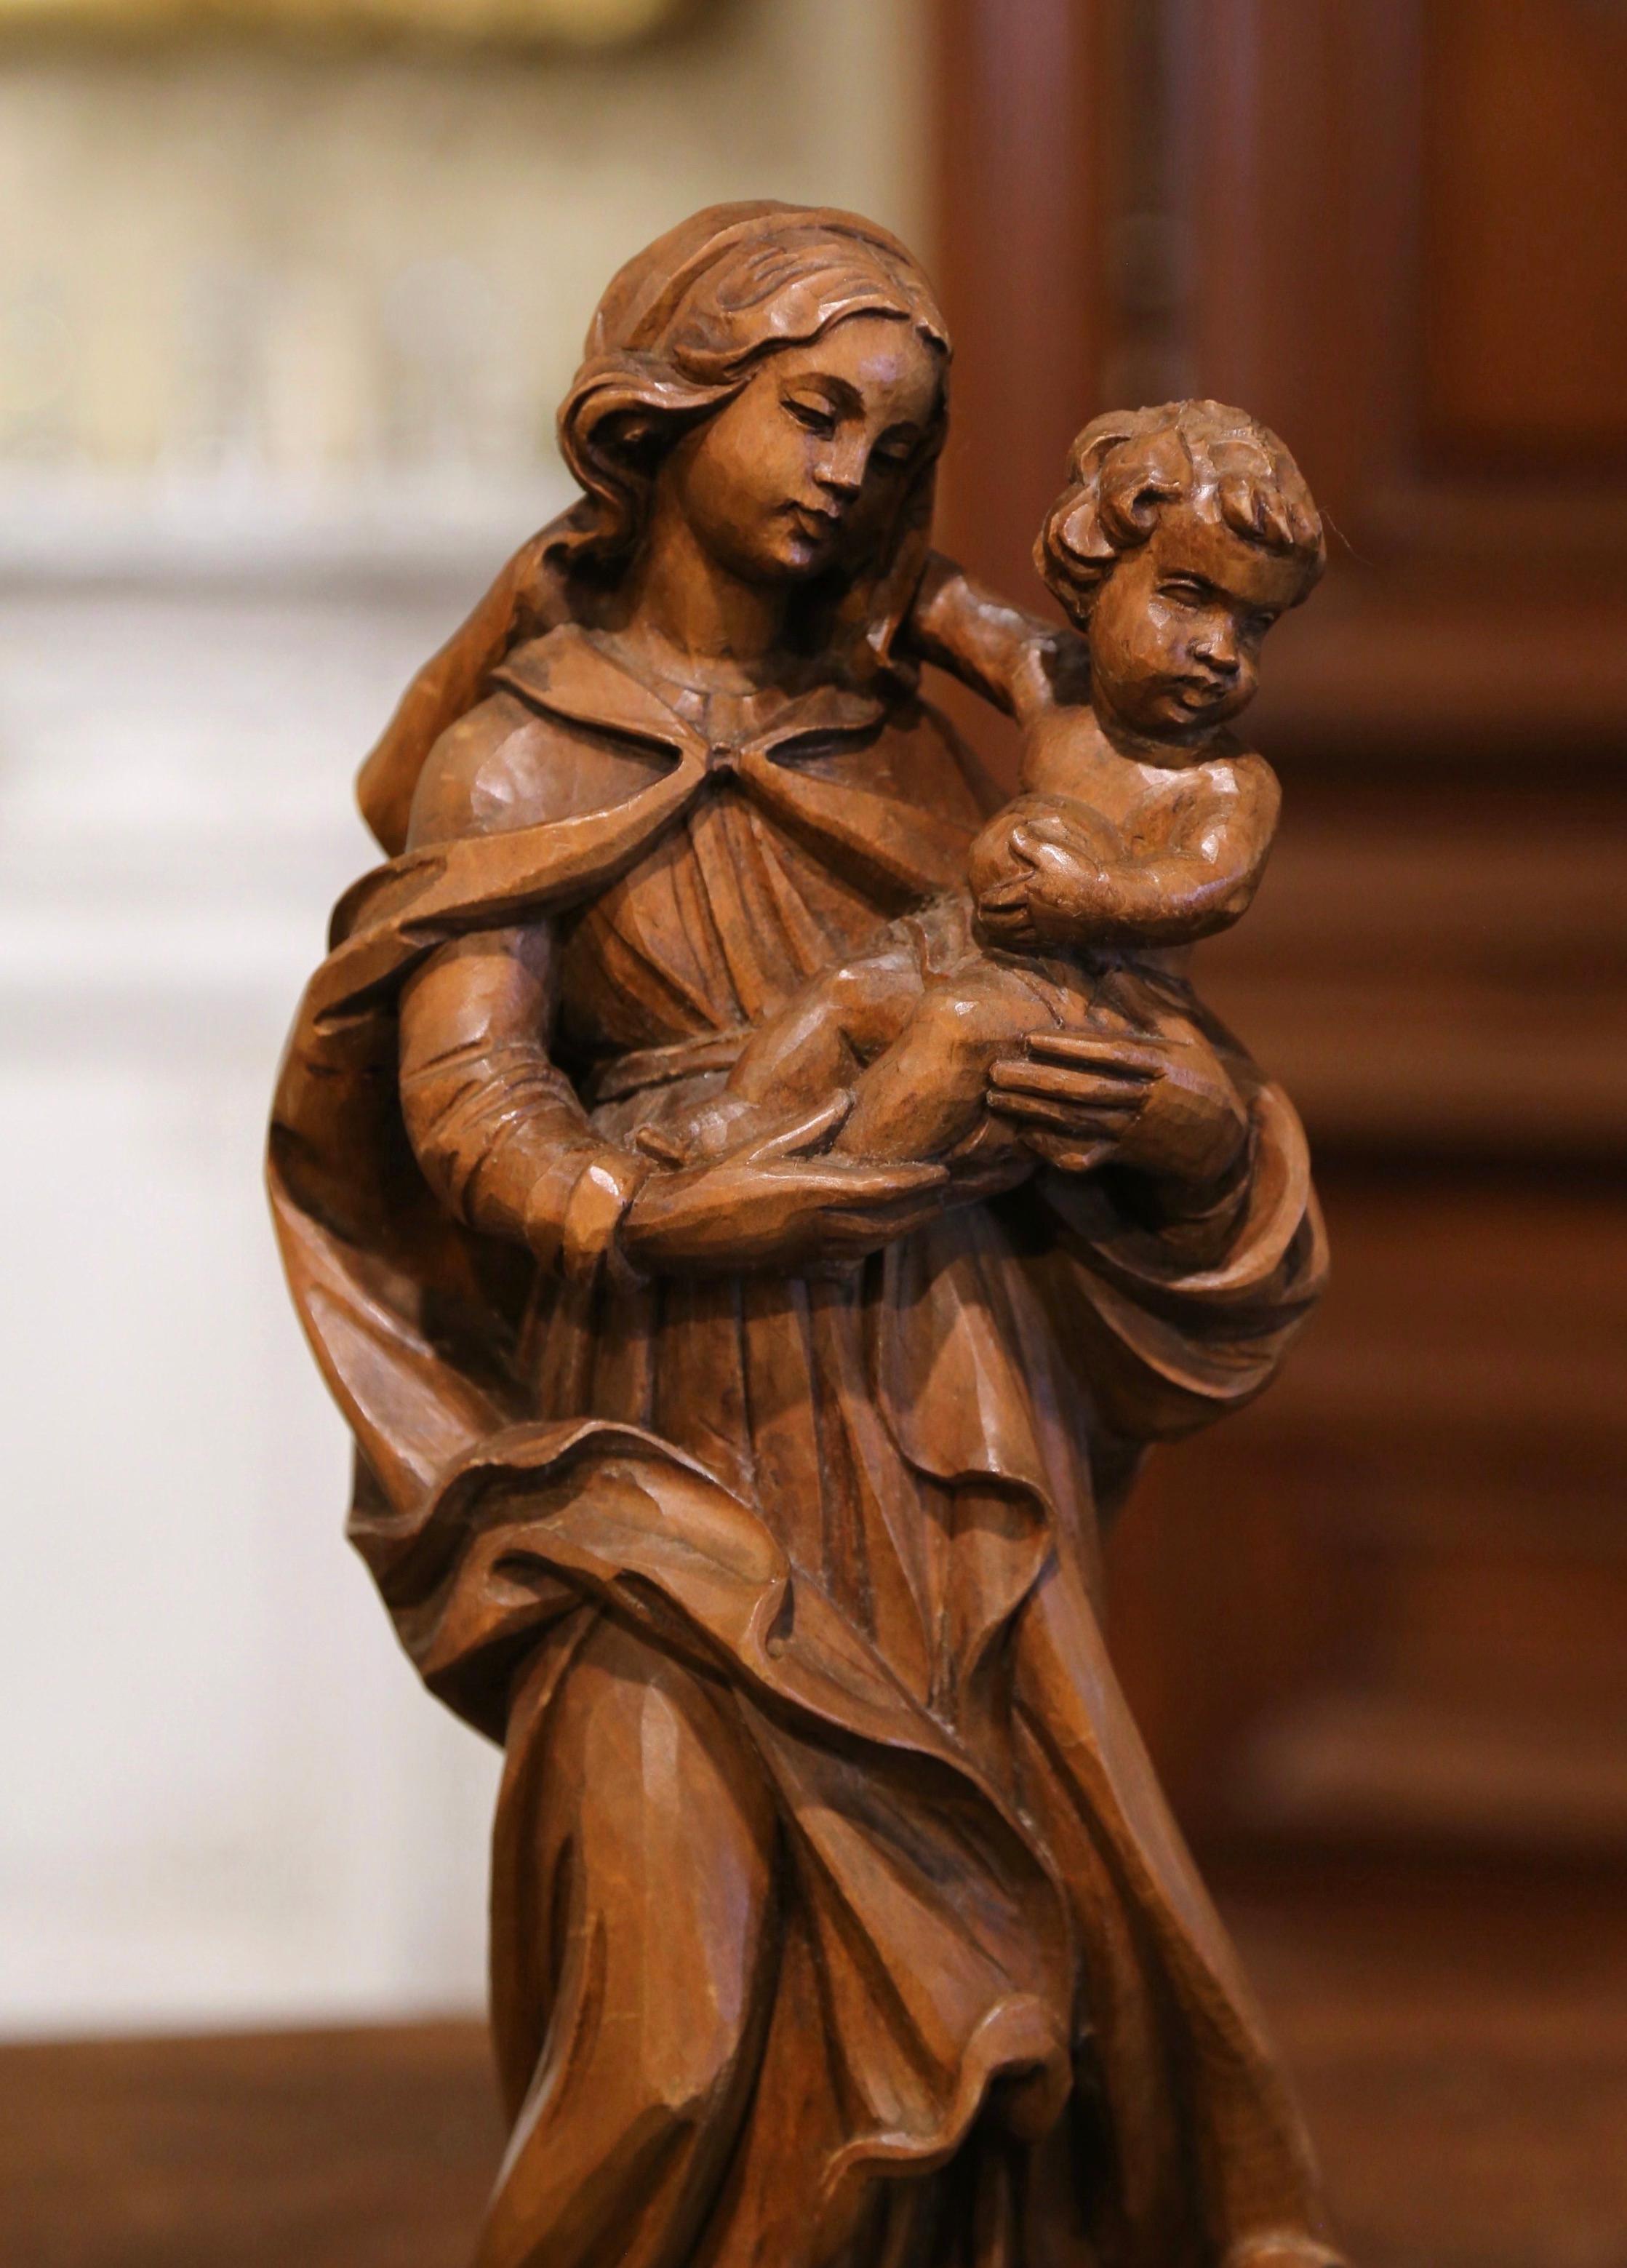 This elegant antique statue of the Mother and Child, was carved in Southern France, circa 1960. The large alluring sculpture in high relief, features Madonna holding her Son, our Lord Jesus Christ. Jesus is holding what looks to be a bowl in his